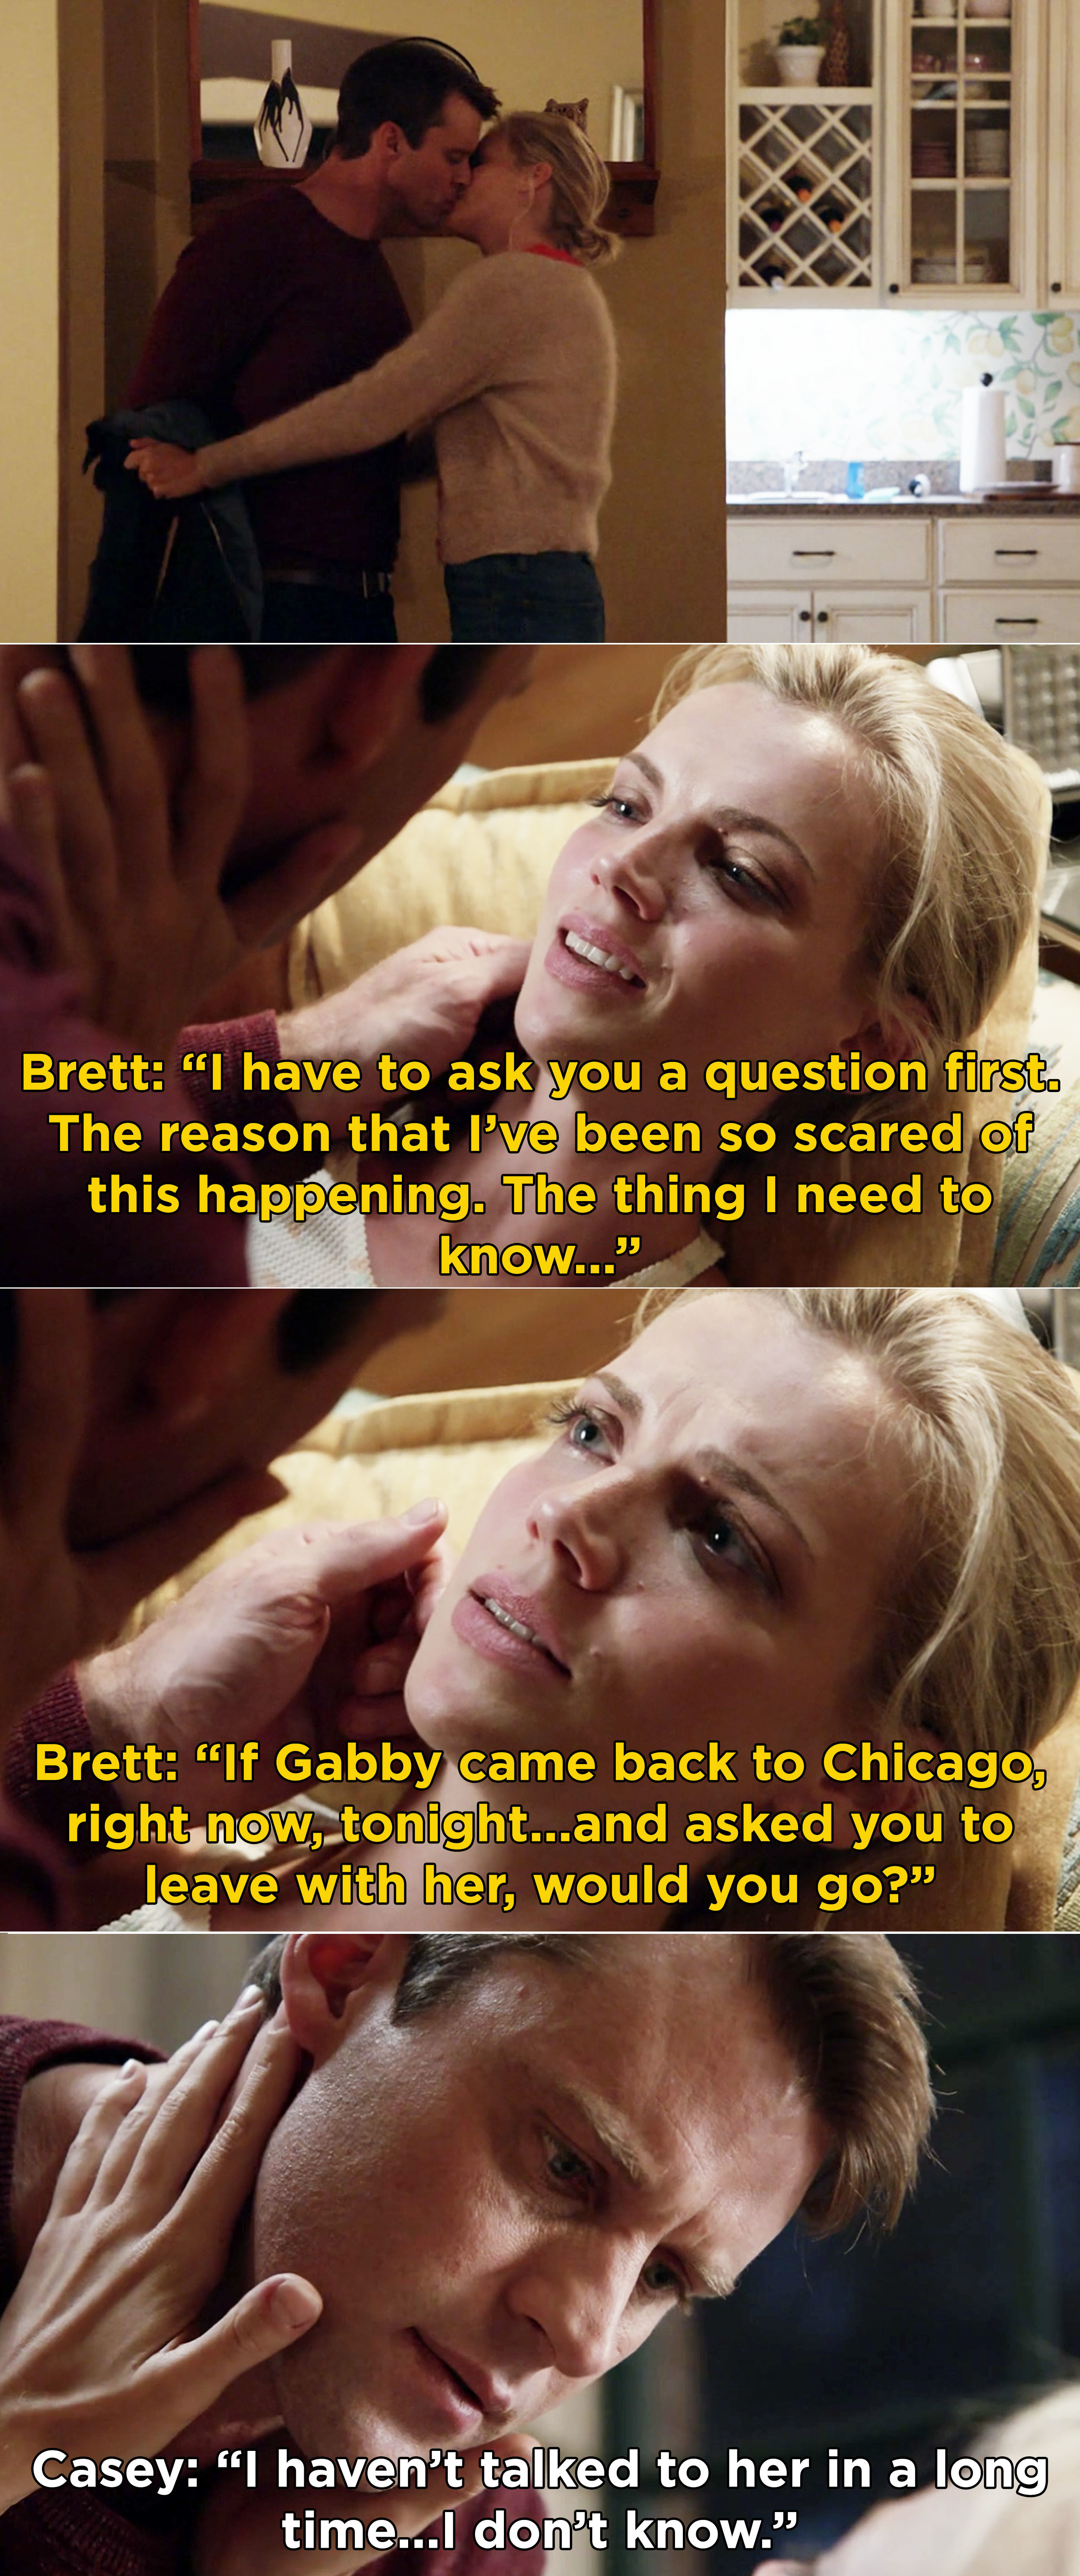 Brett and Casey kissing and Brett asking if Gabby came back to Chicago, would Casey go be with her instead